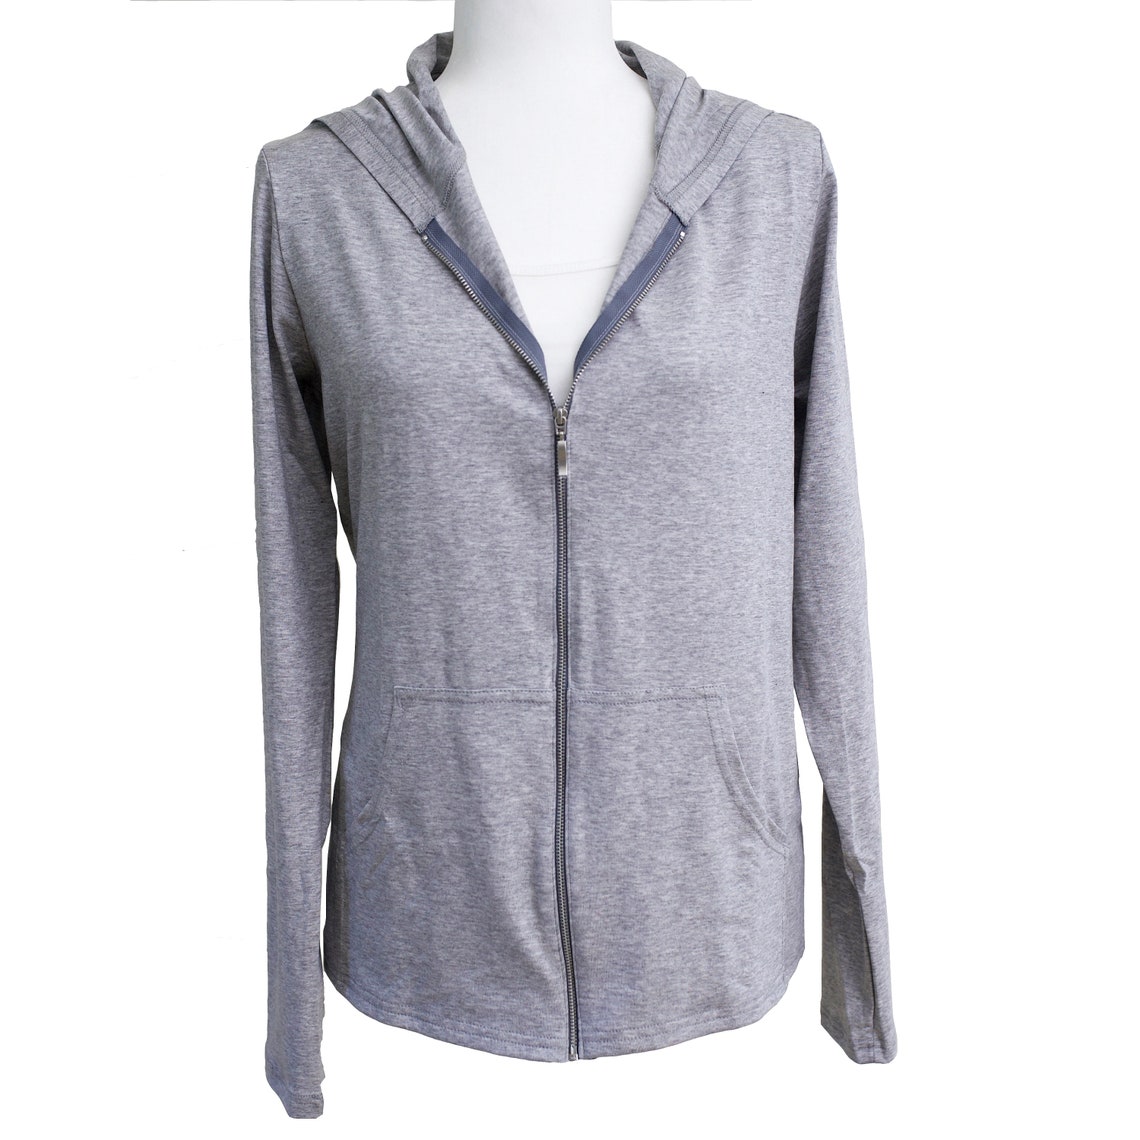 Post Mastectomy Hoodie With Surgical Drain Pockets Long Sleeve - Etsy